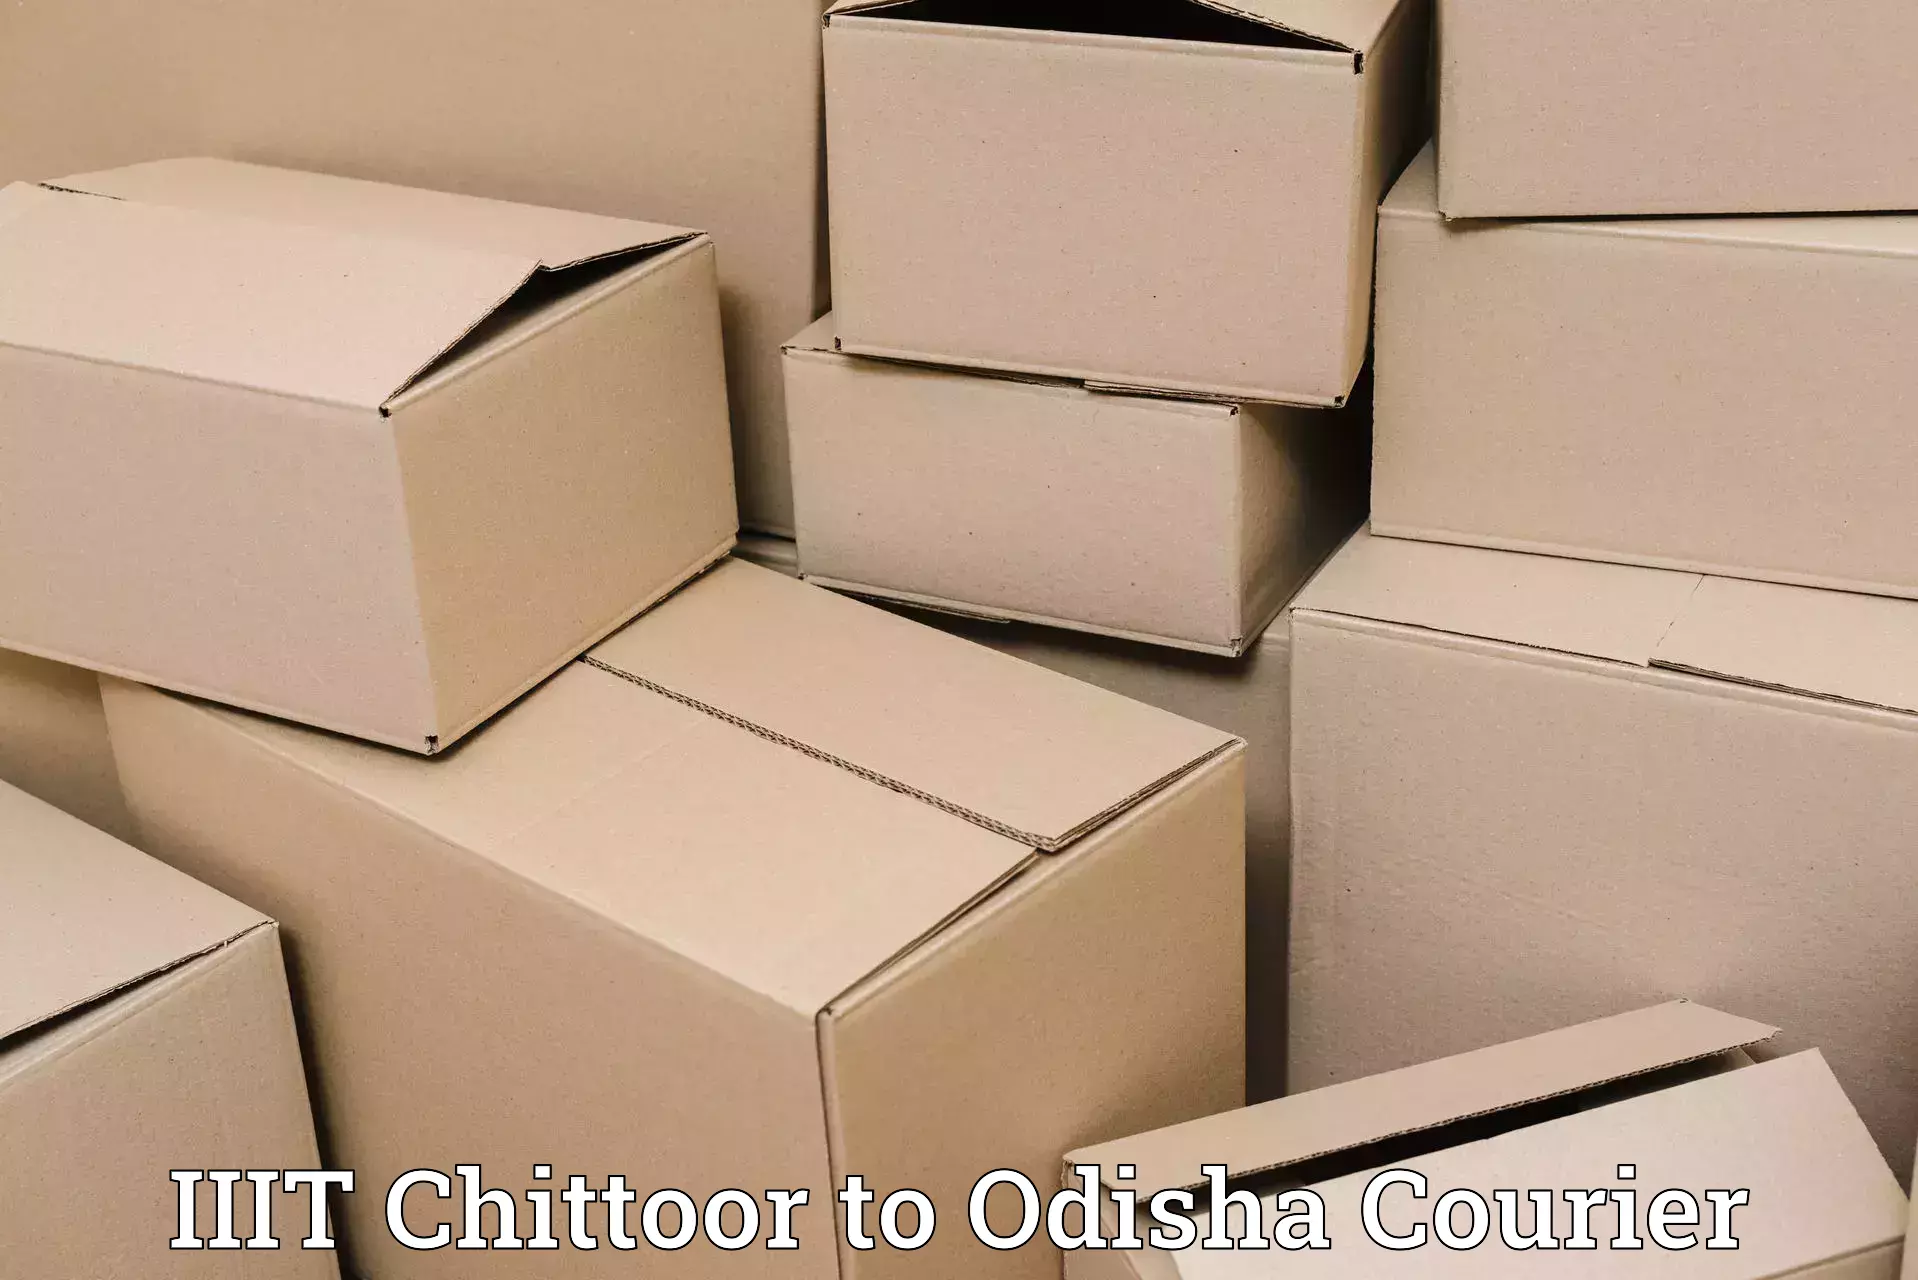 Quality courier services in IIIT Chittoor to Odisha